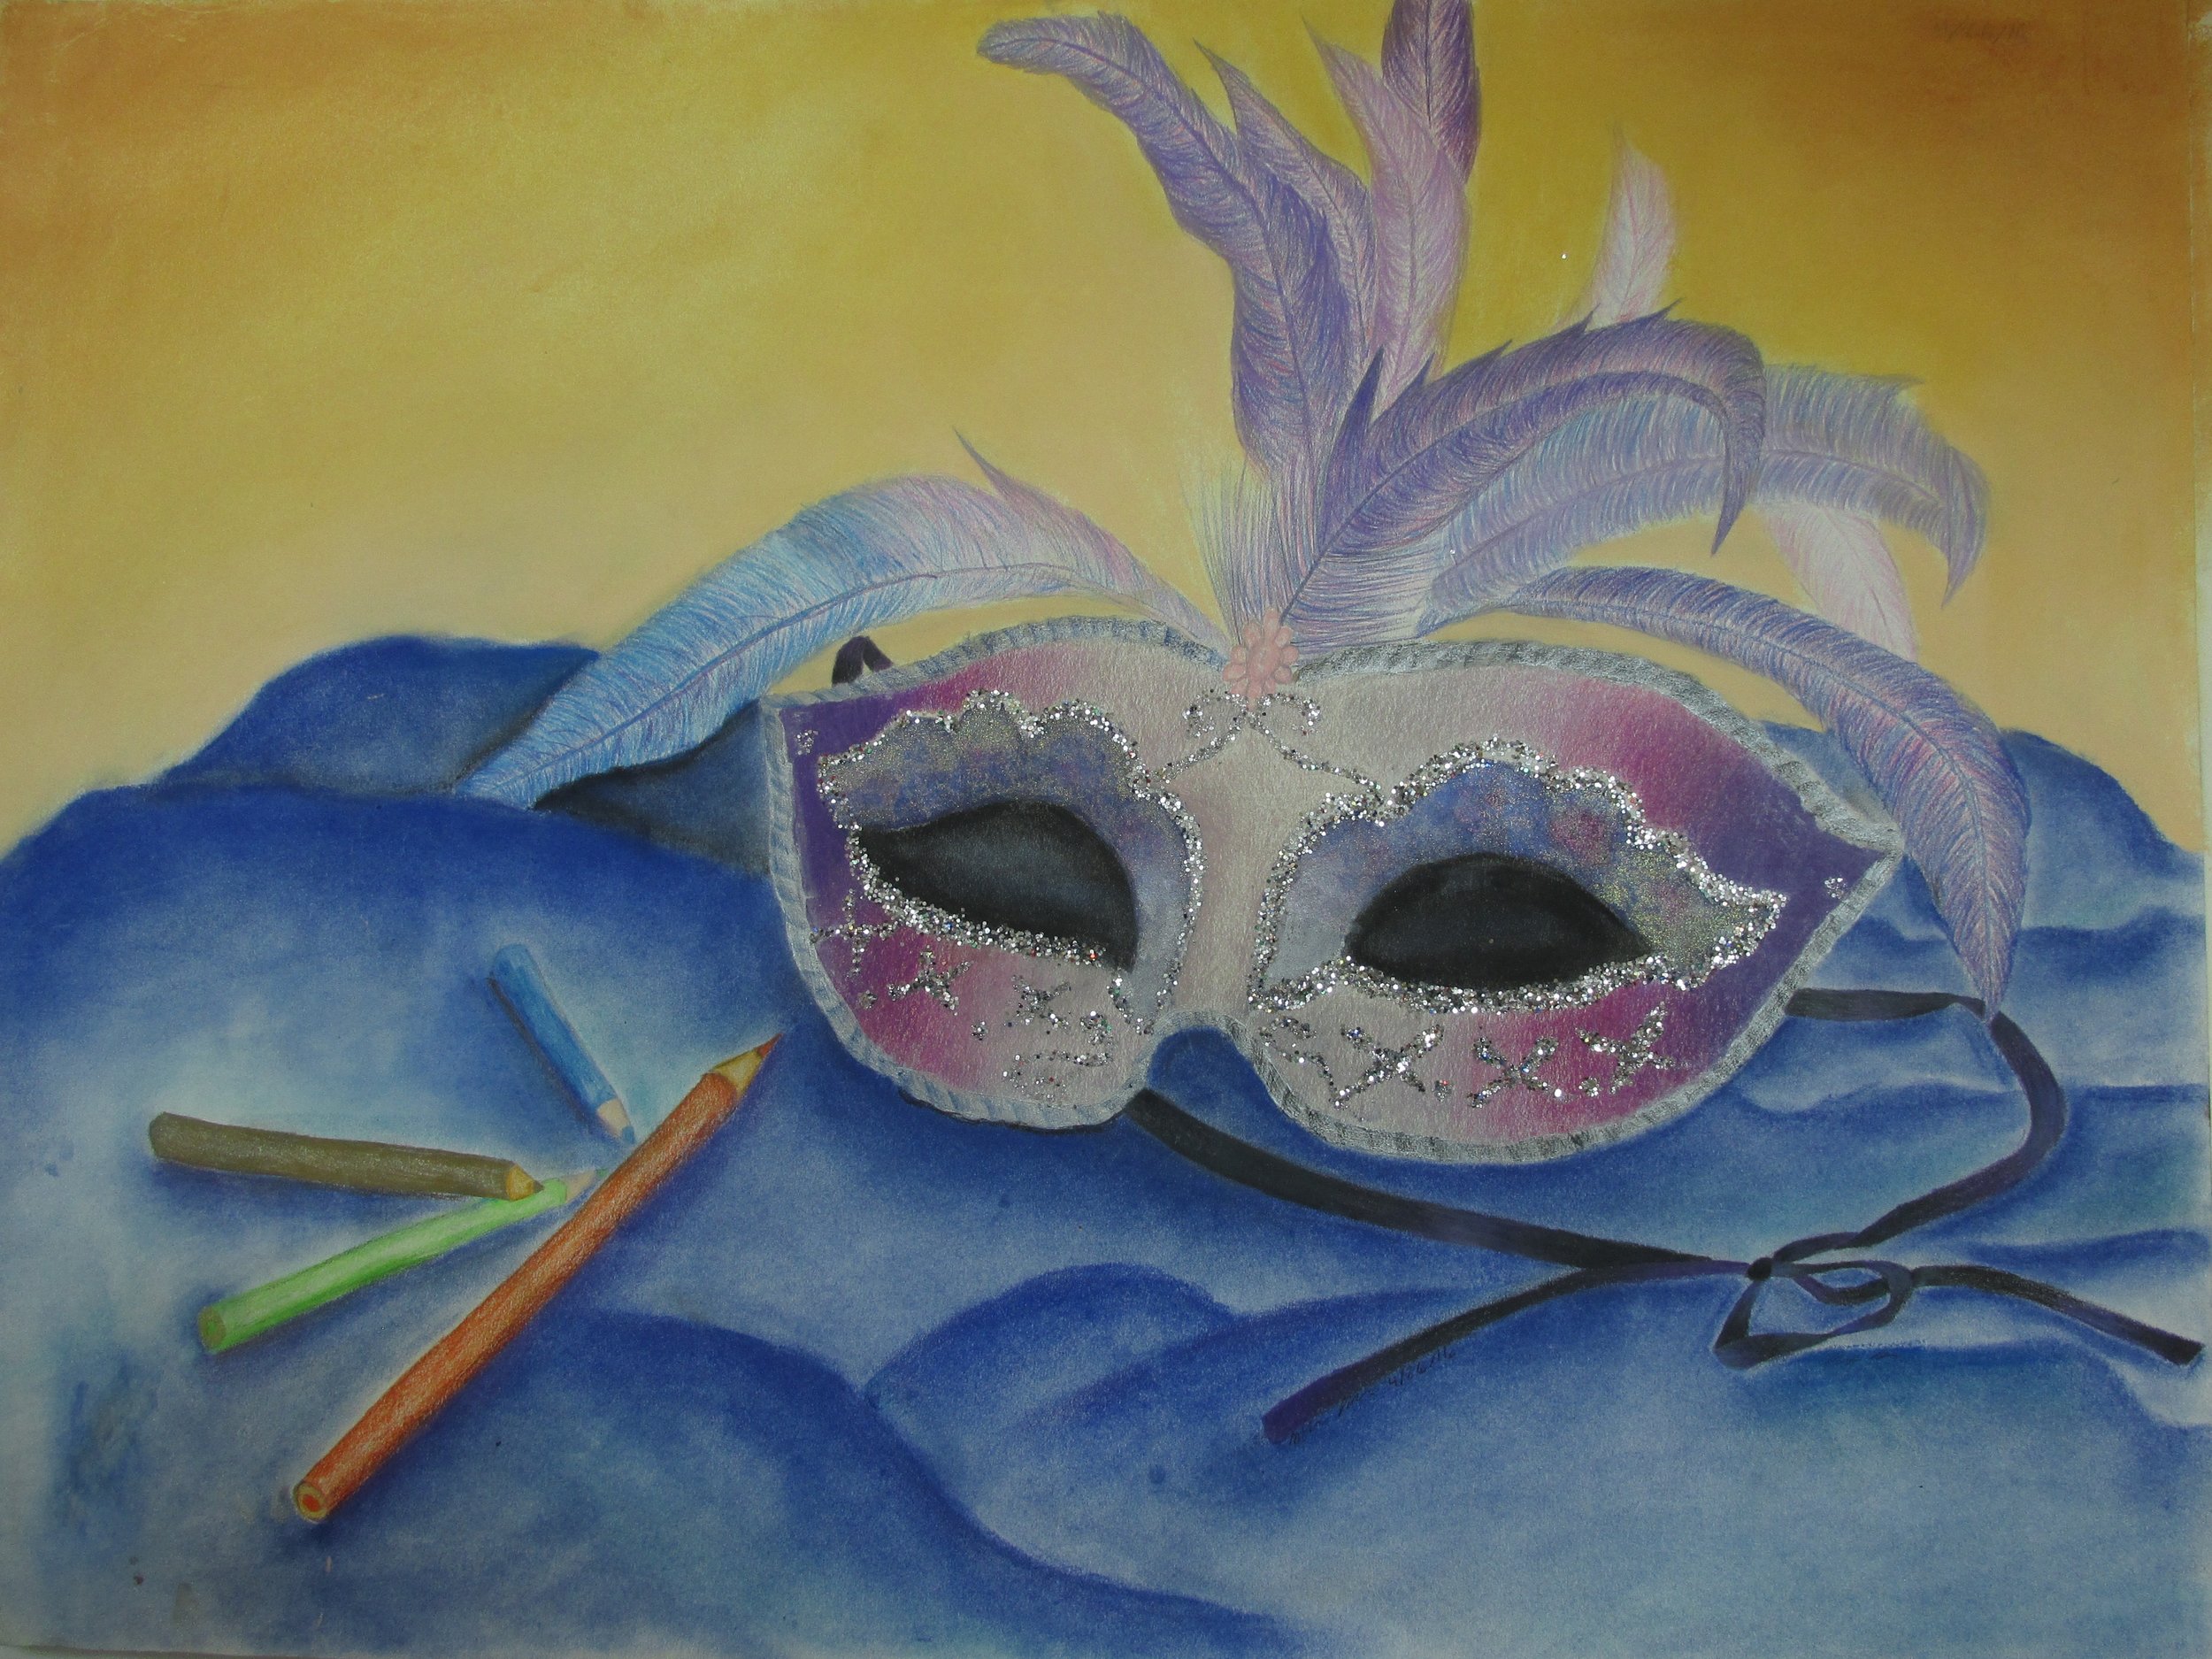 Honorable Mention - Nika L. (8th)